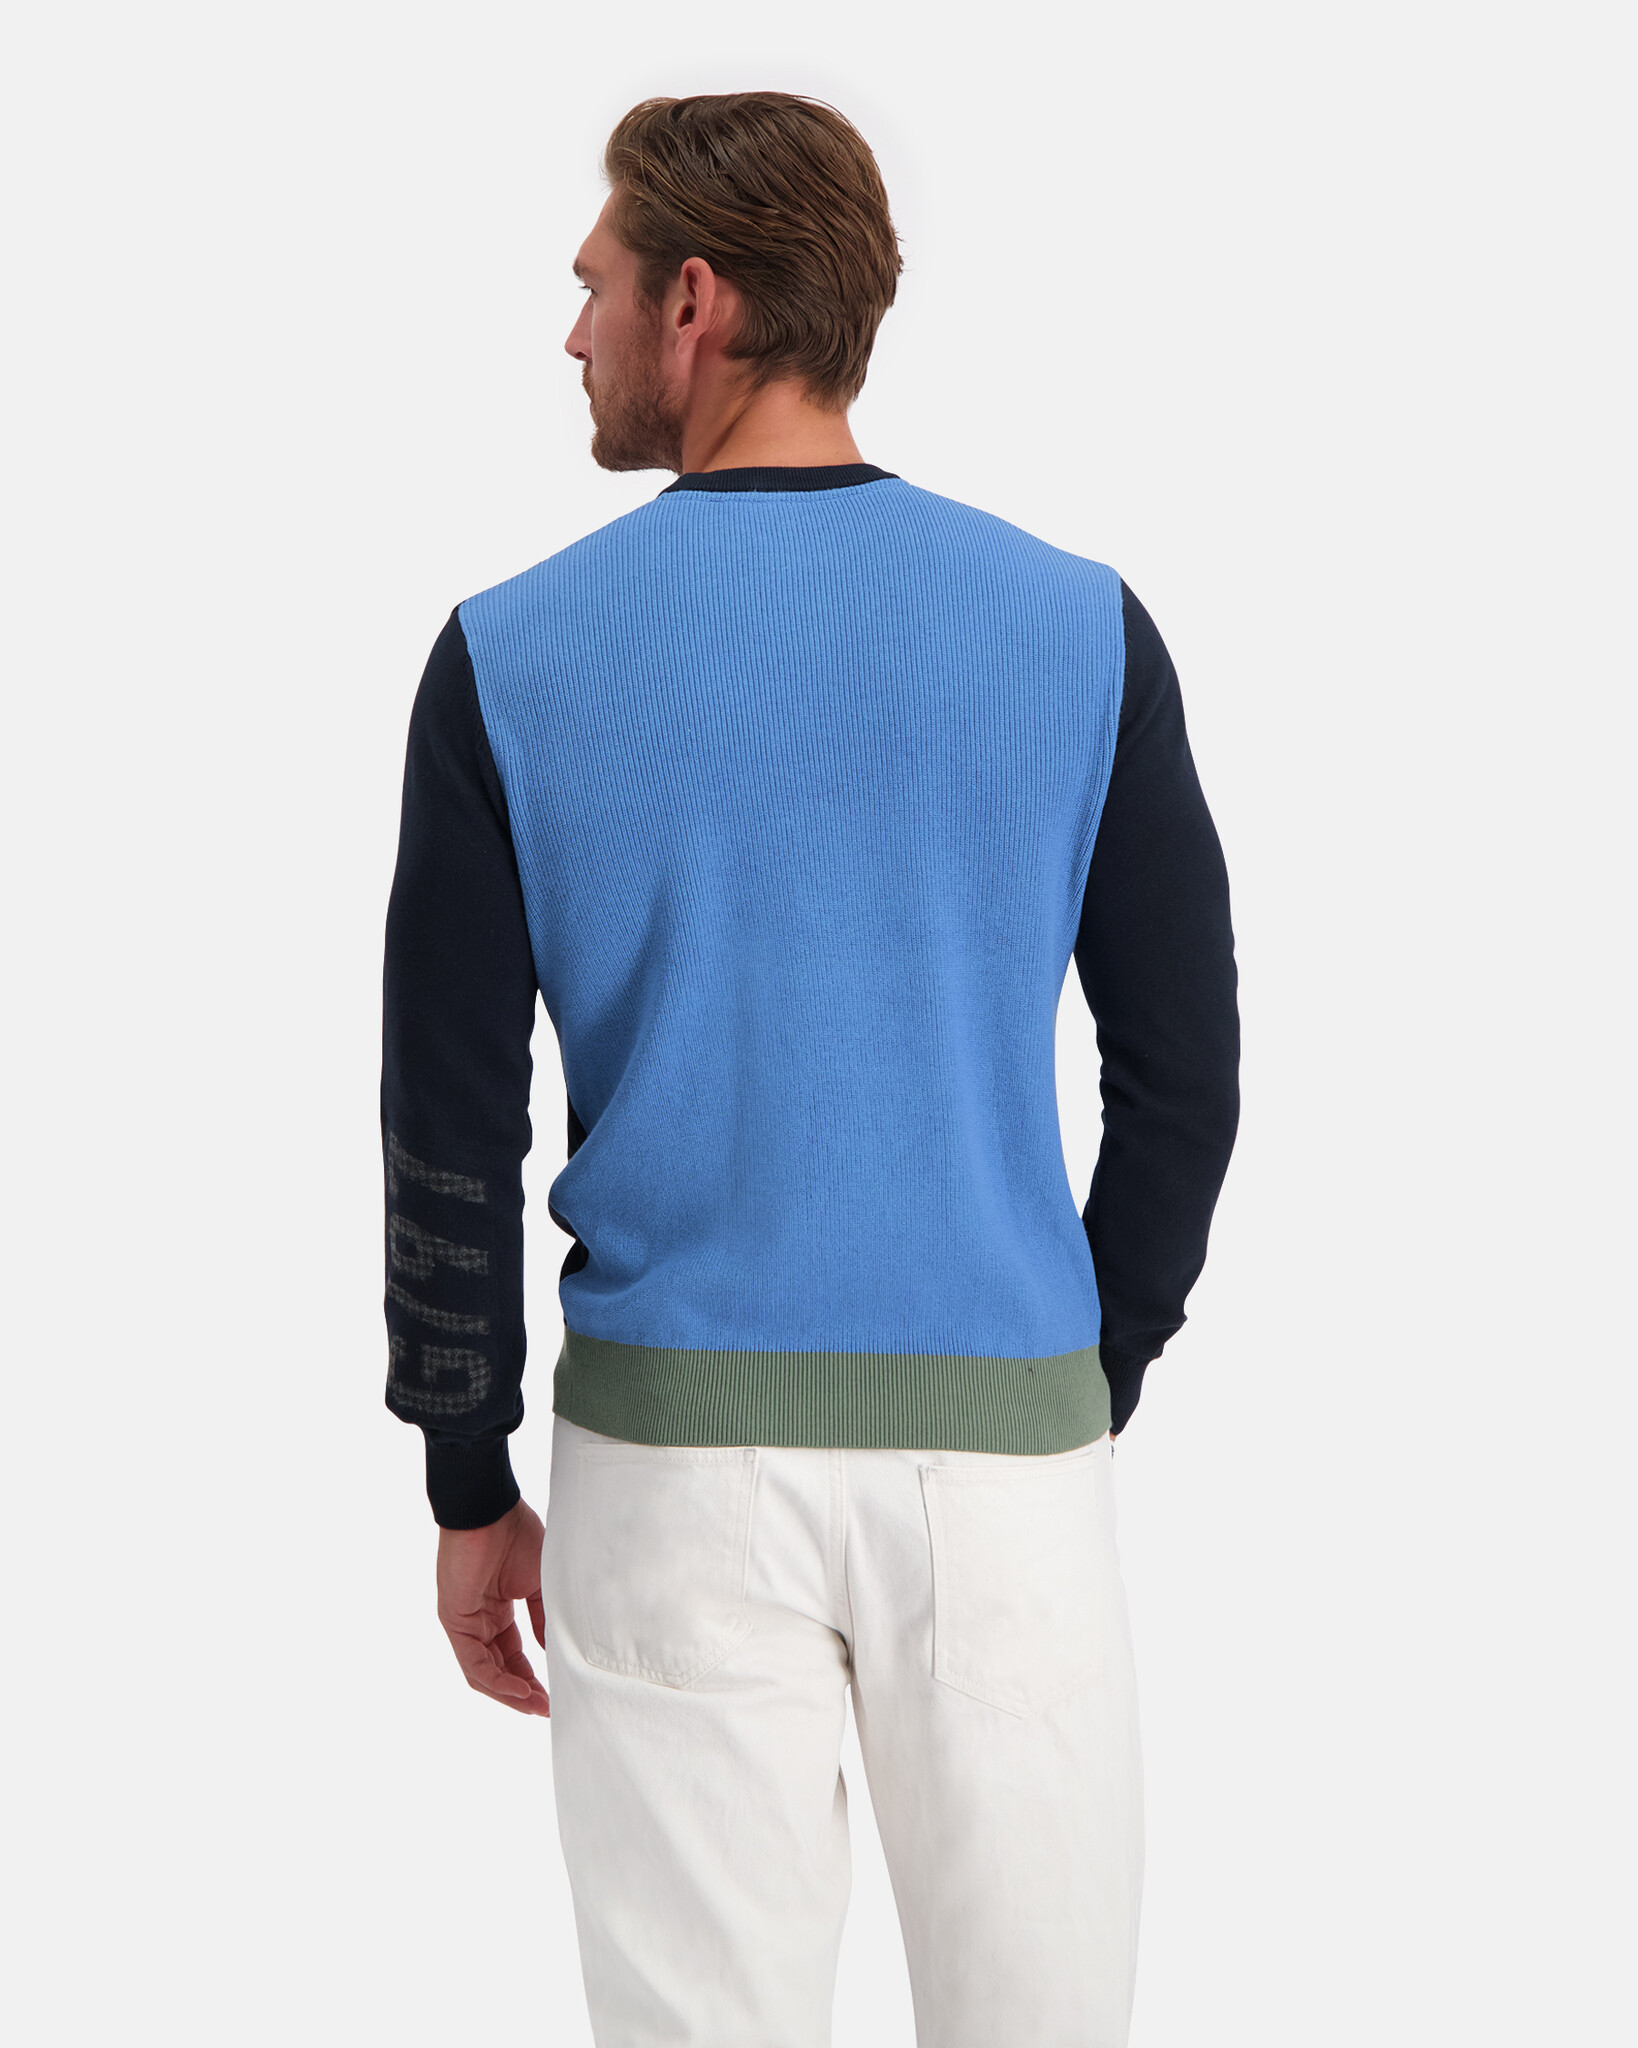 Round neck cotton cashmere pullover with contrasting back pannel and intarsia artwork